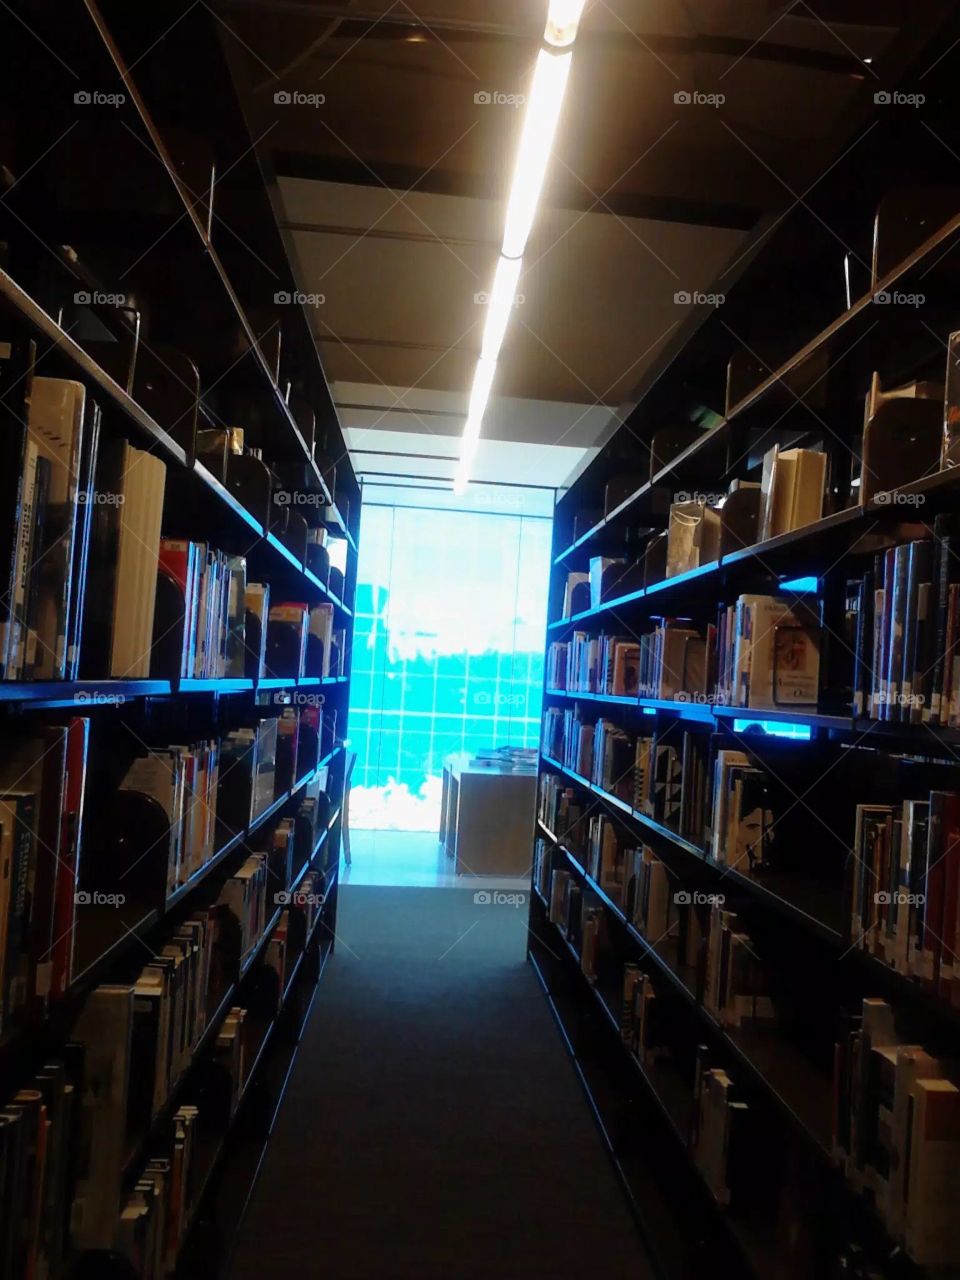 Aisles in library looking towards across the street.